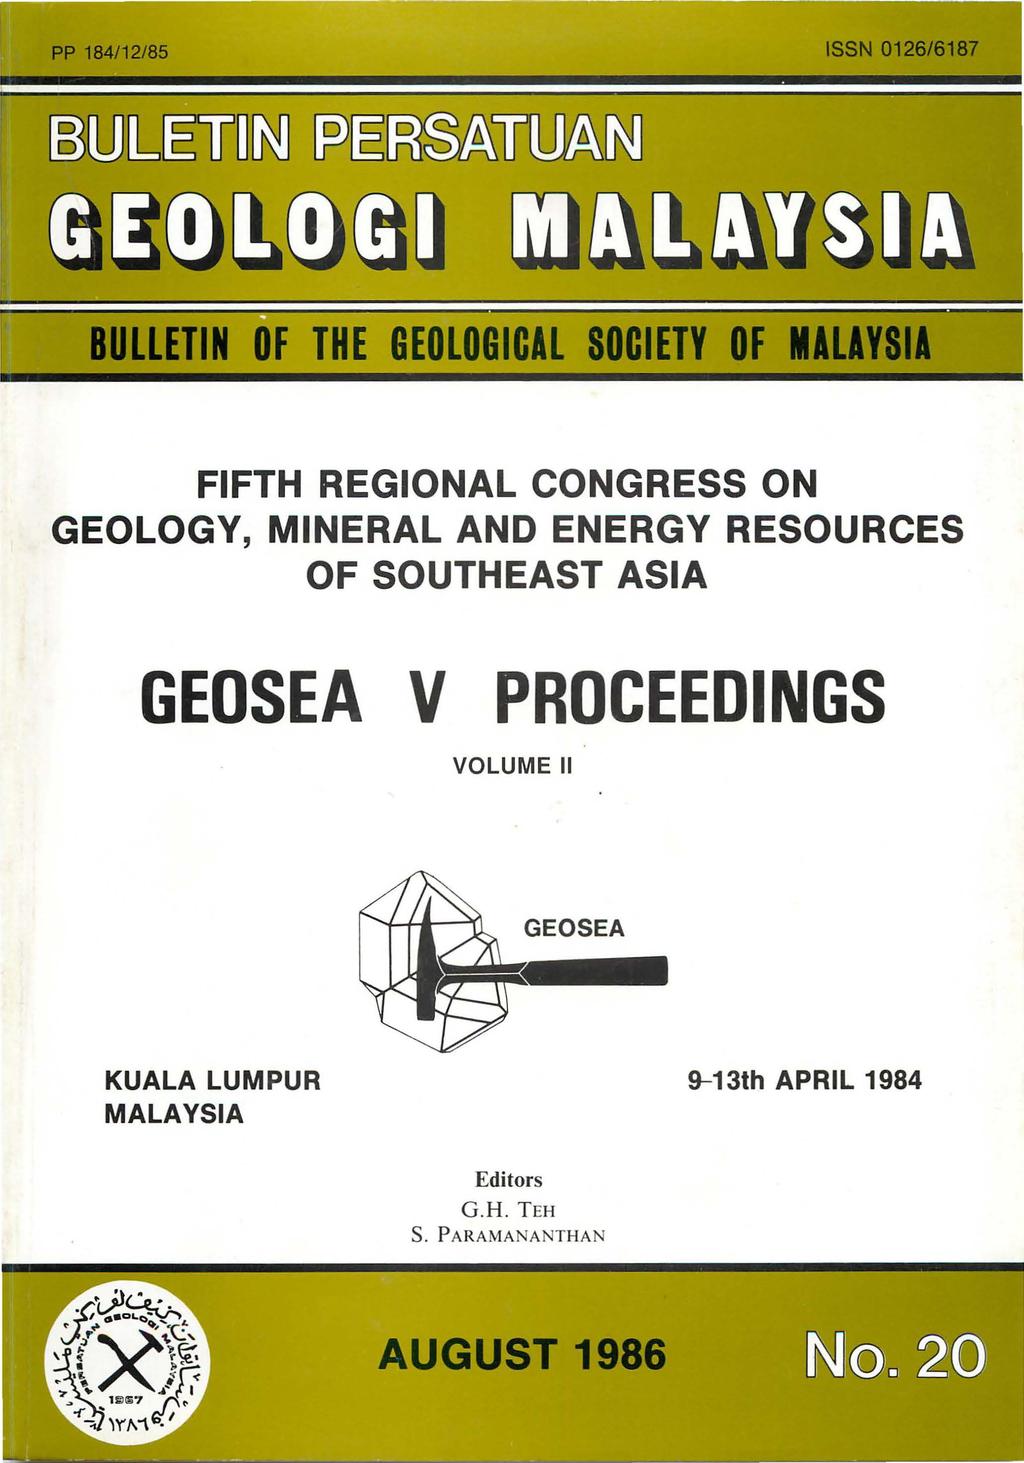 FIFTH REGIONAL CONGRESS ON GEOLOGY, MINERAL AND ENERGY RESOURCES OF SOUTHEAST ASIA GEOSEA V PROCEEDINGS